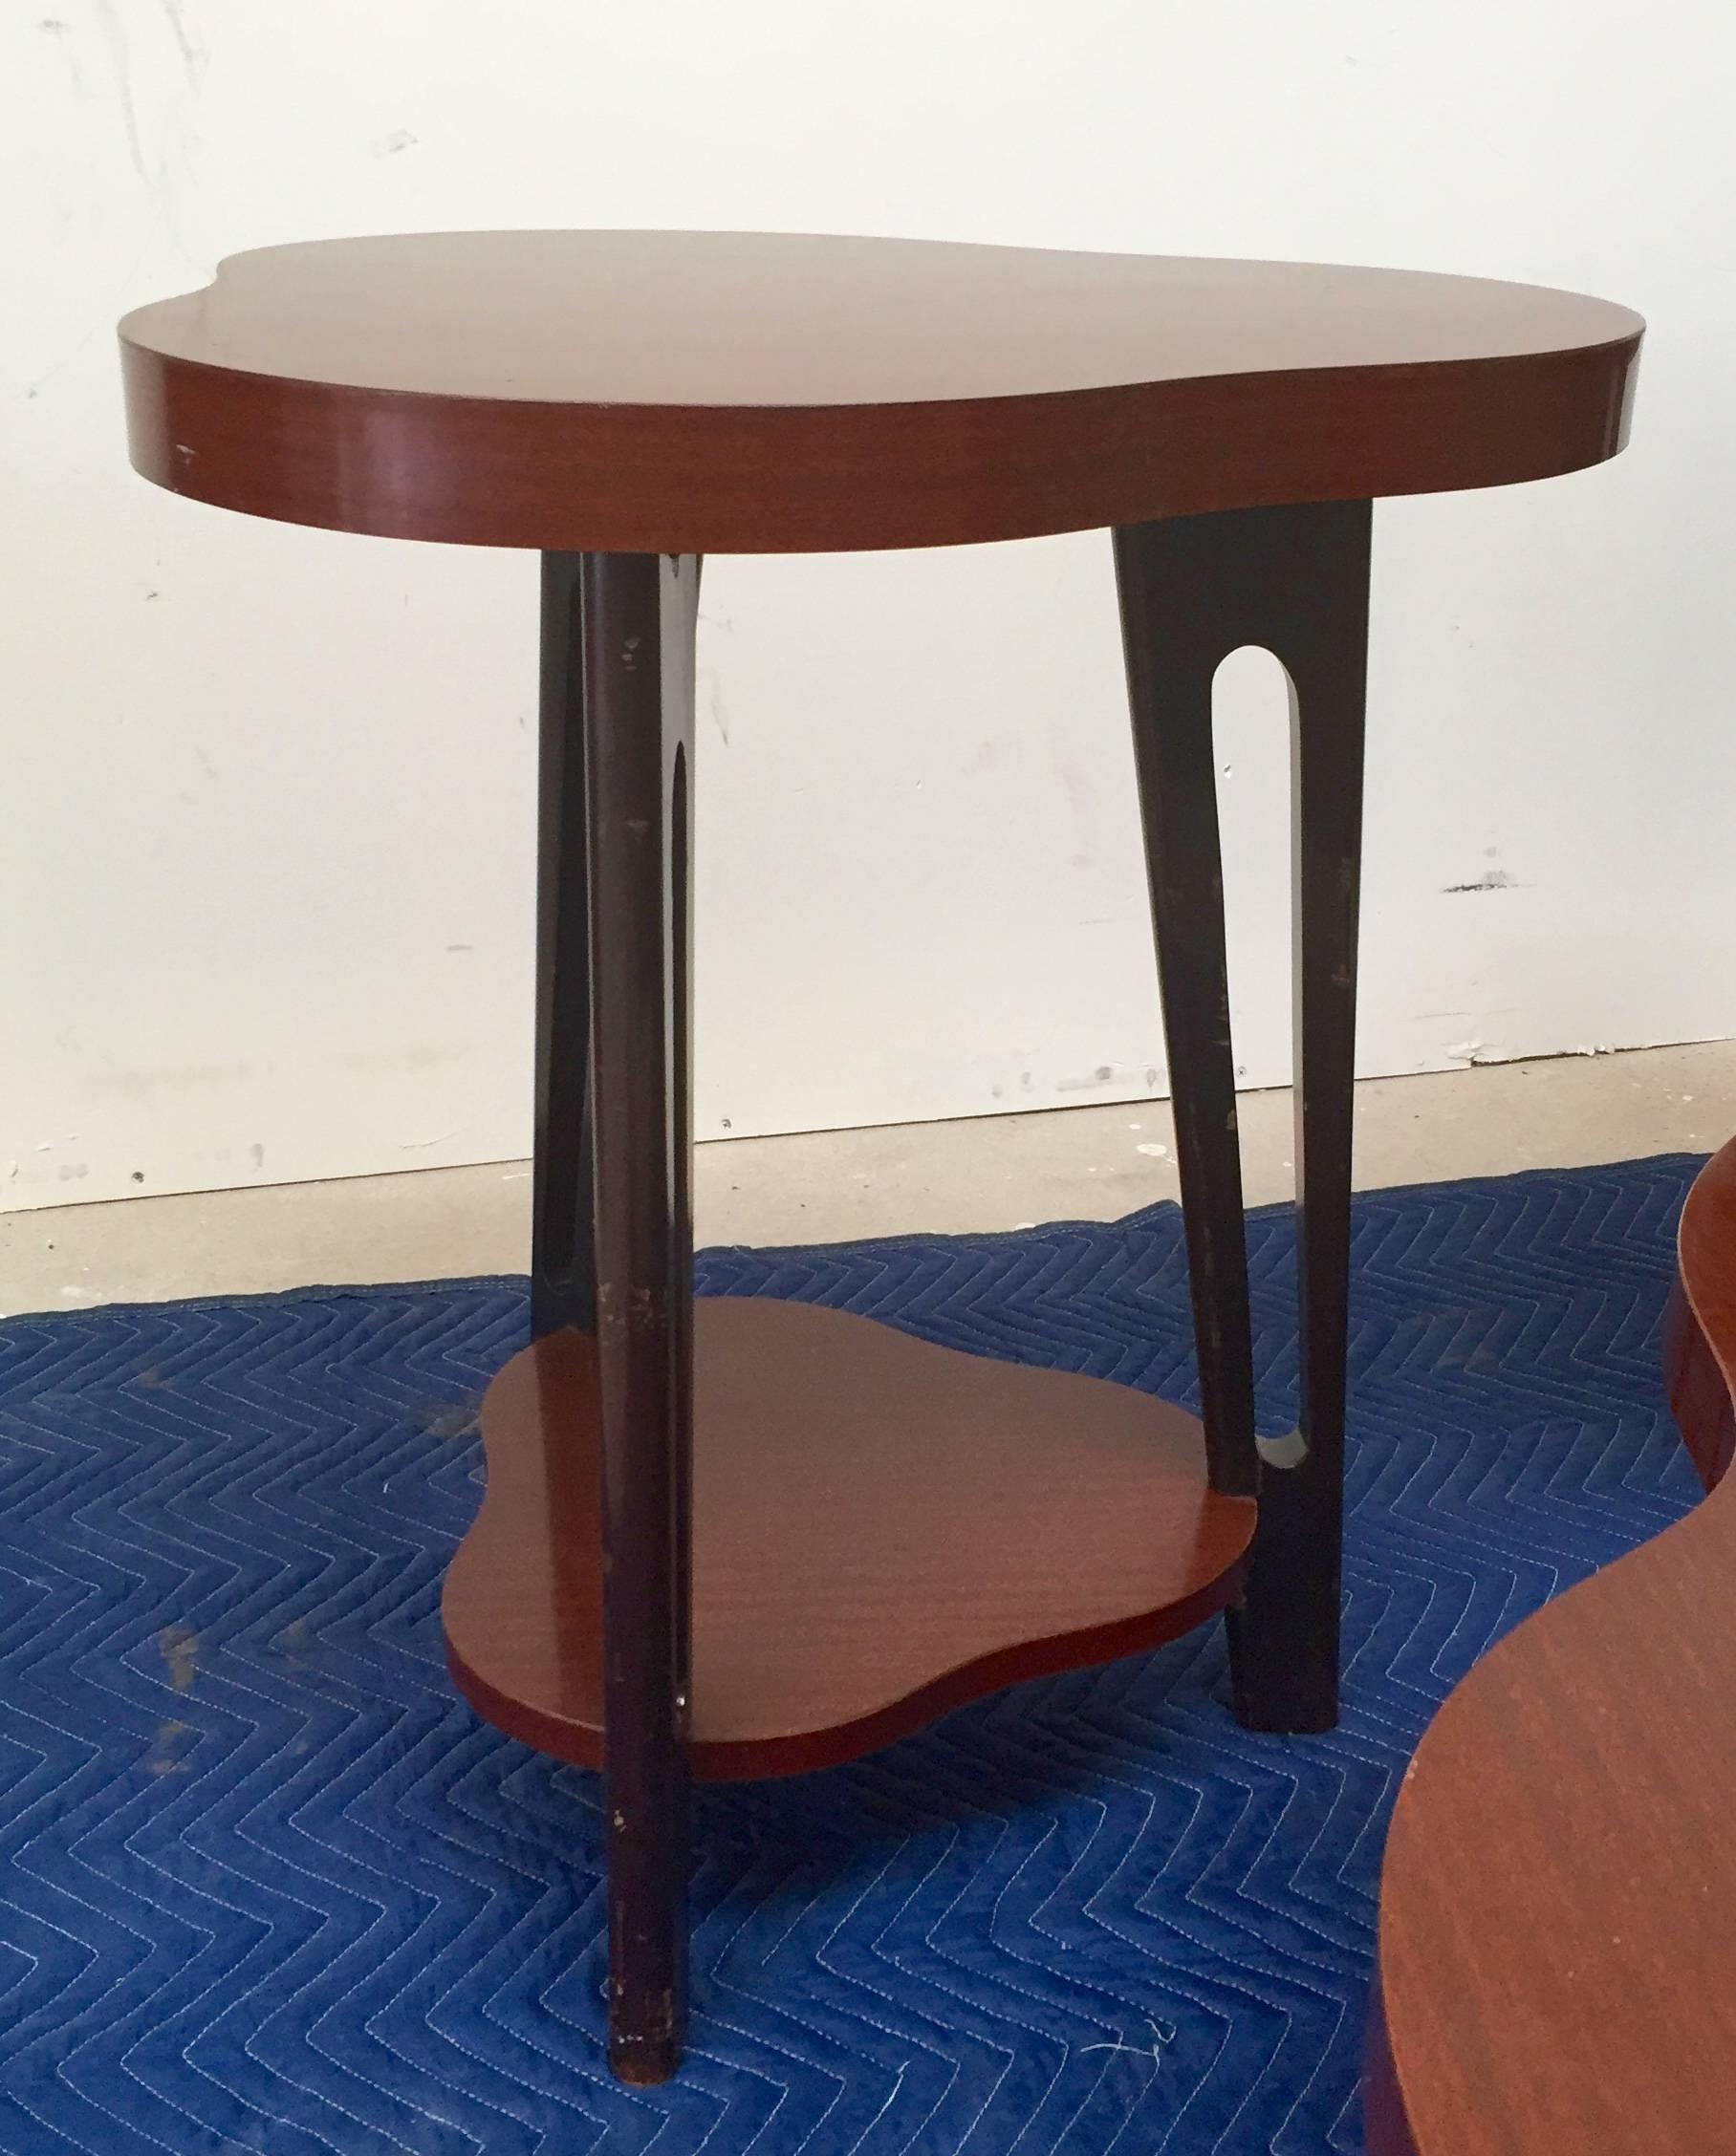 Early 1950s design set of tables. Original wood grain laminate tops set on stylized wooden hairpin shaped legs in black.
The dimensions on these tables is as follows:
Side tables: 27 1/2" tall x 19" to 22" in diameter.
Cocktail